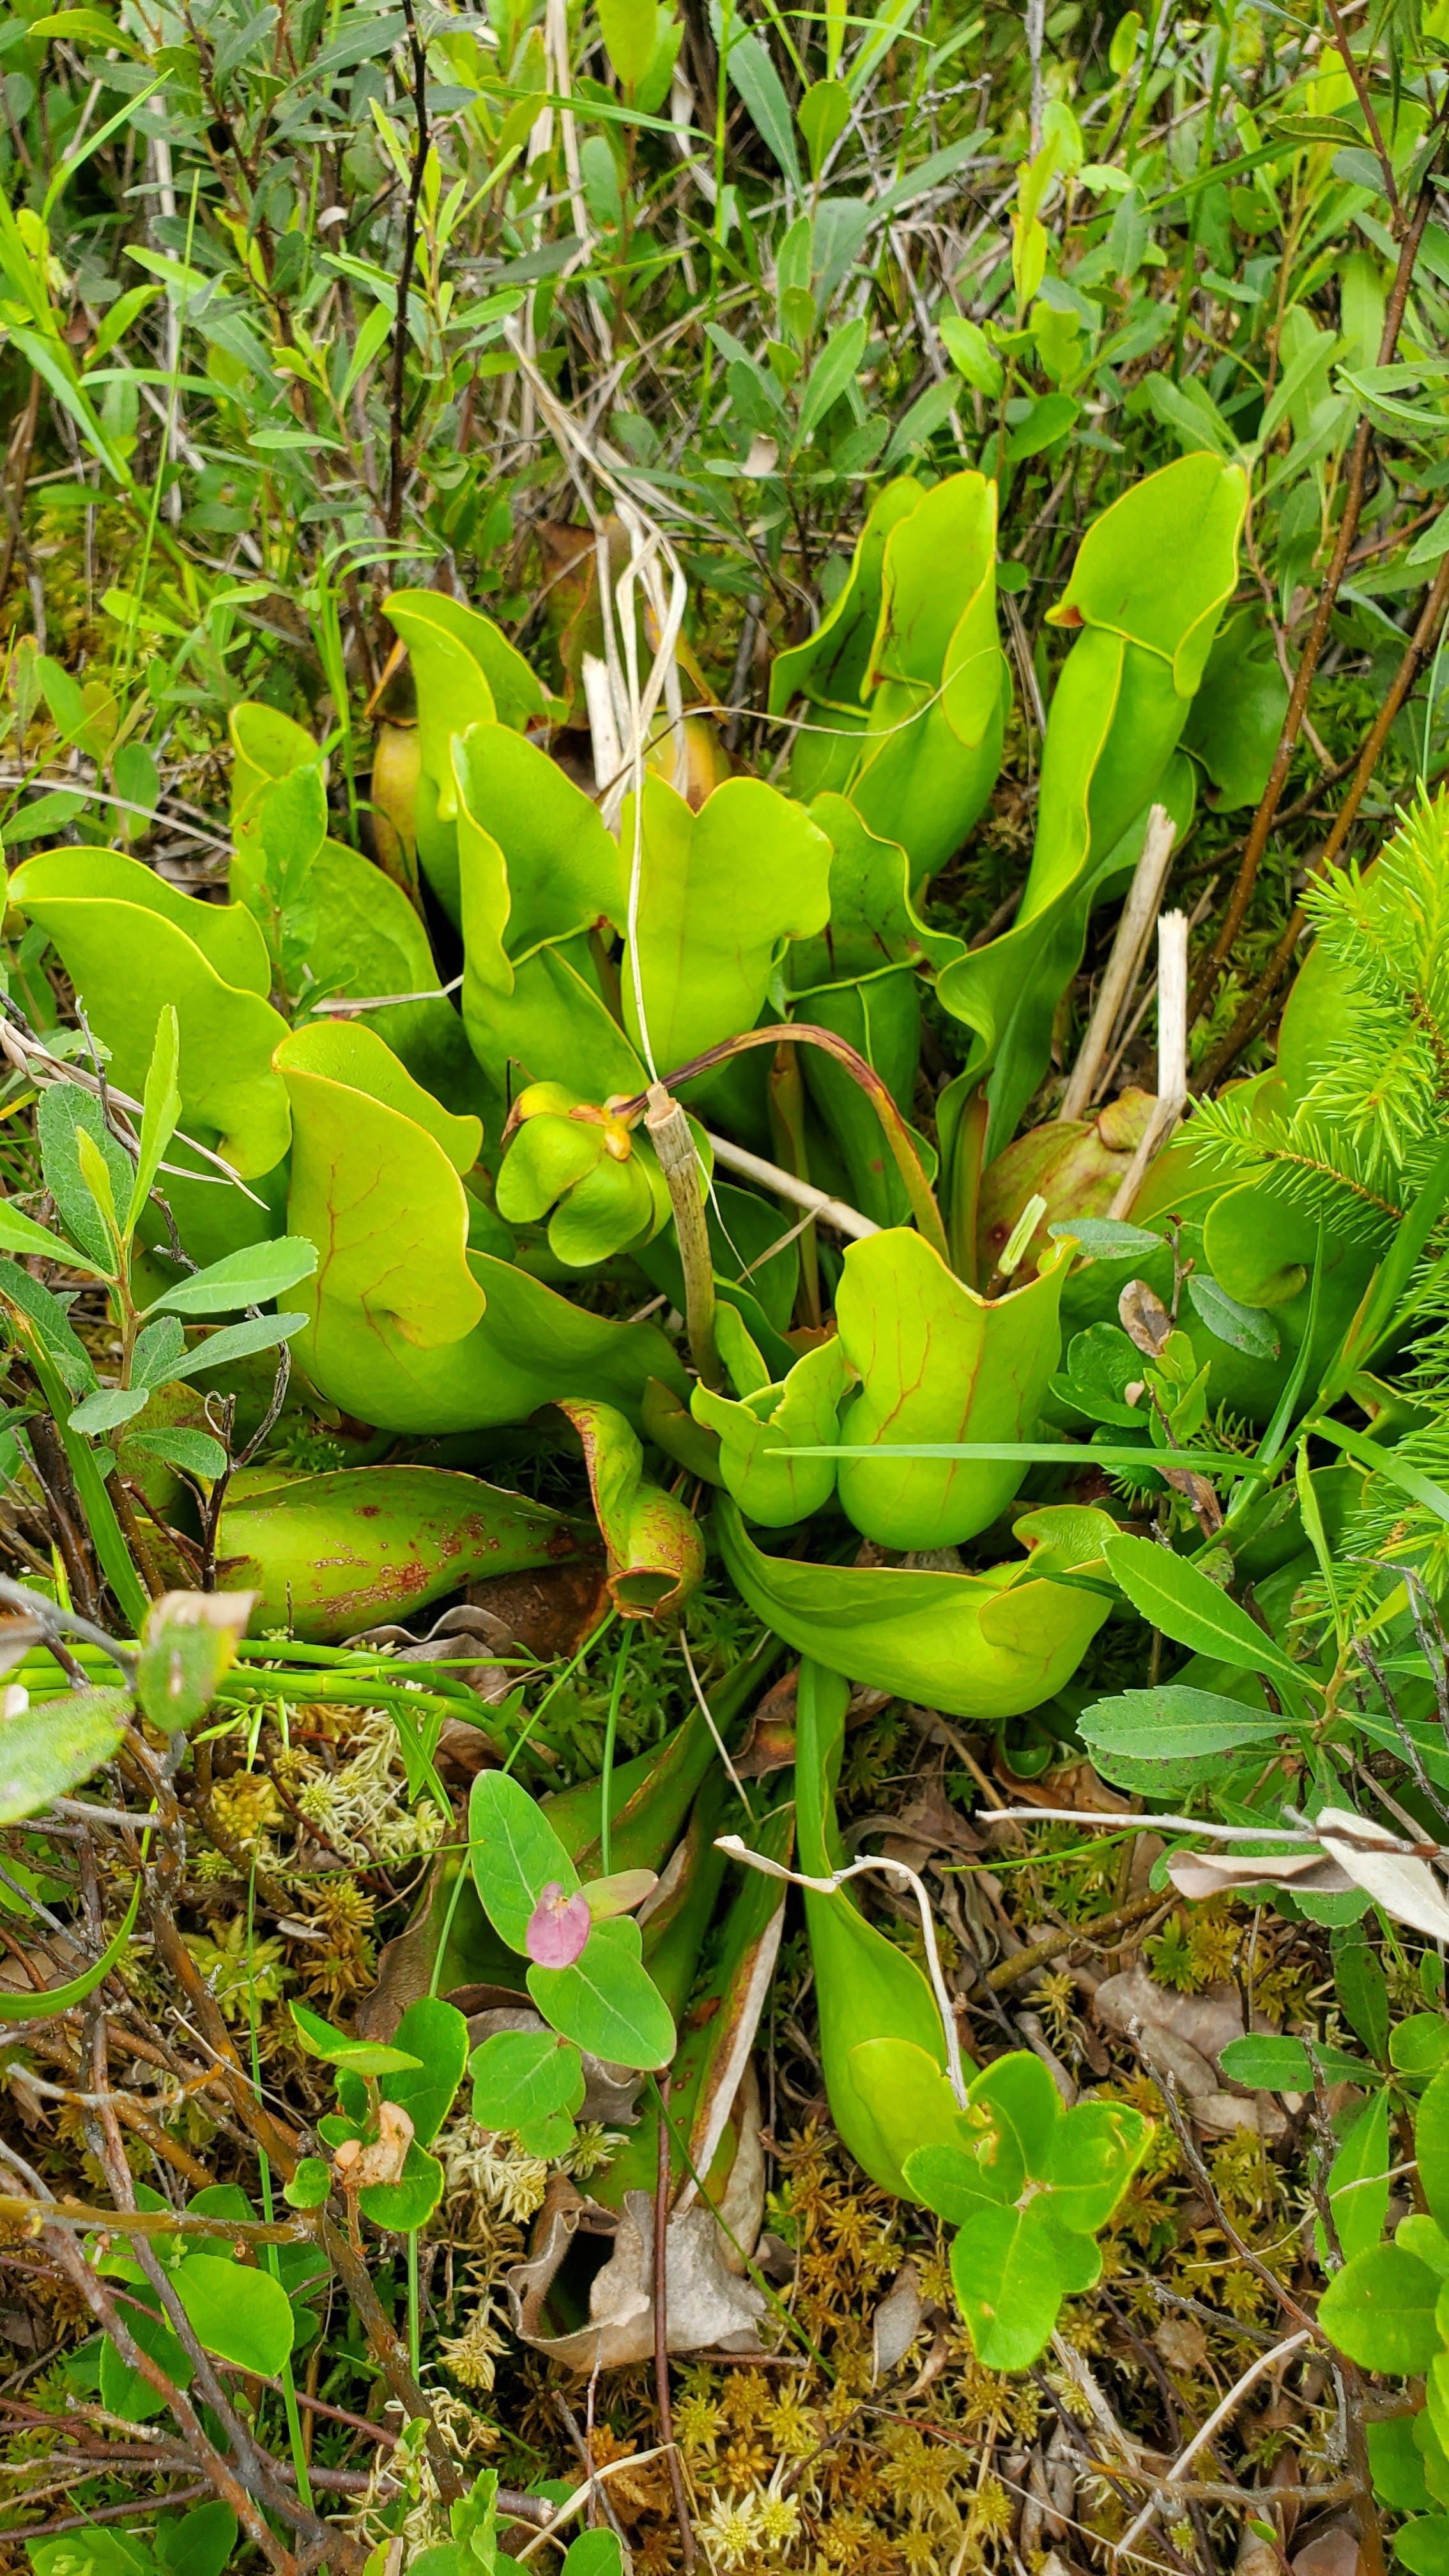 a pitcher plant; a low-growing, bright green plant with a star-like bouquet of overlapping cup-shaped leaves.